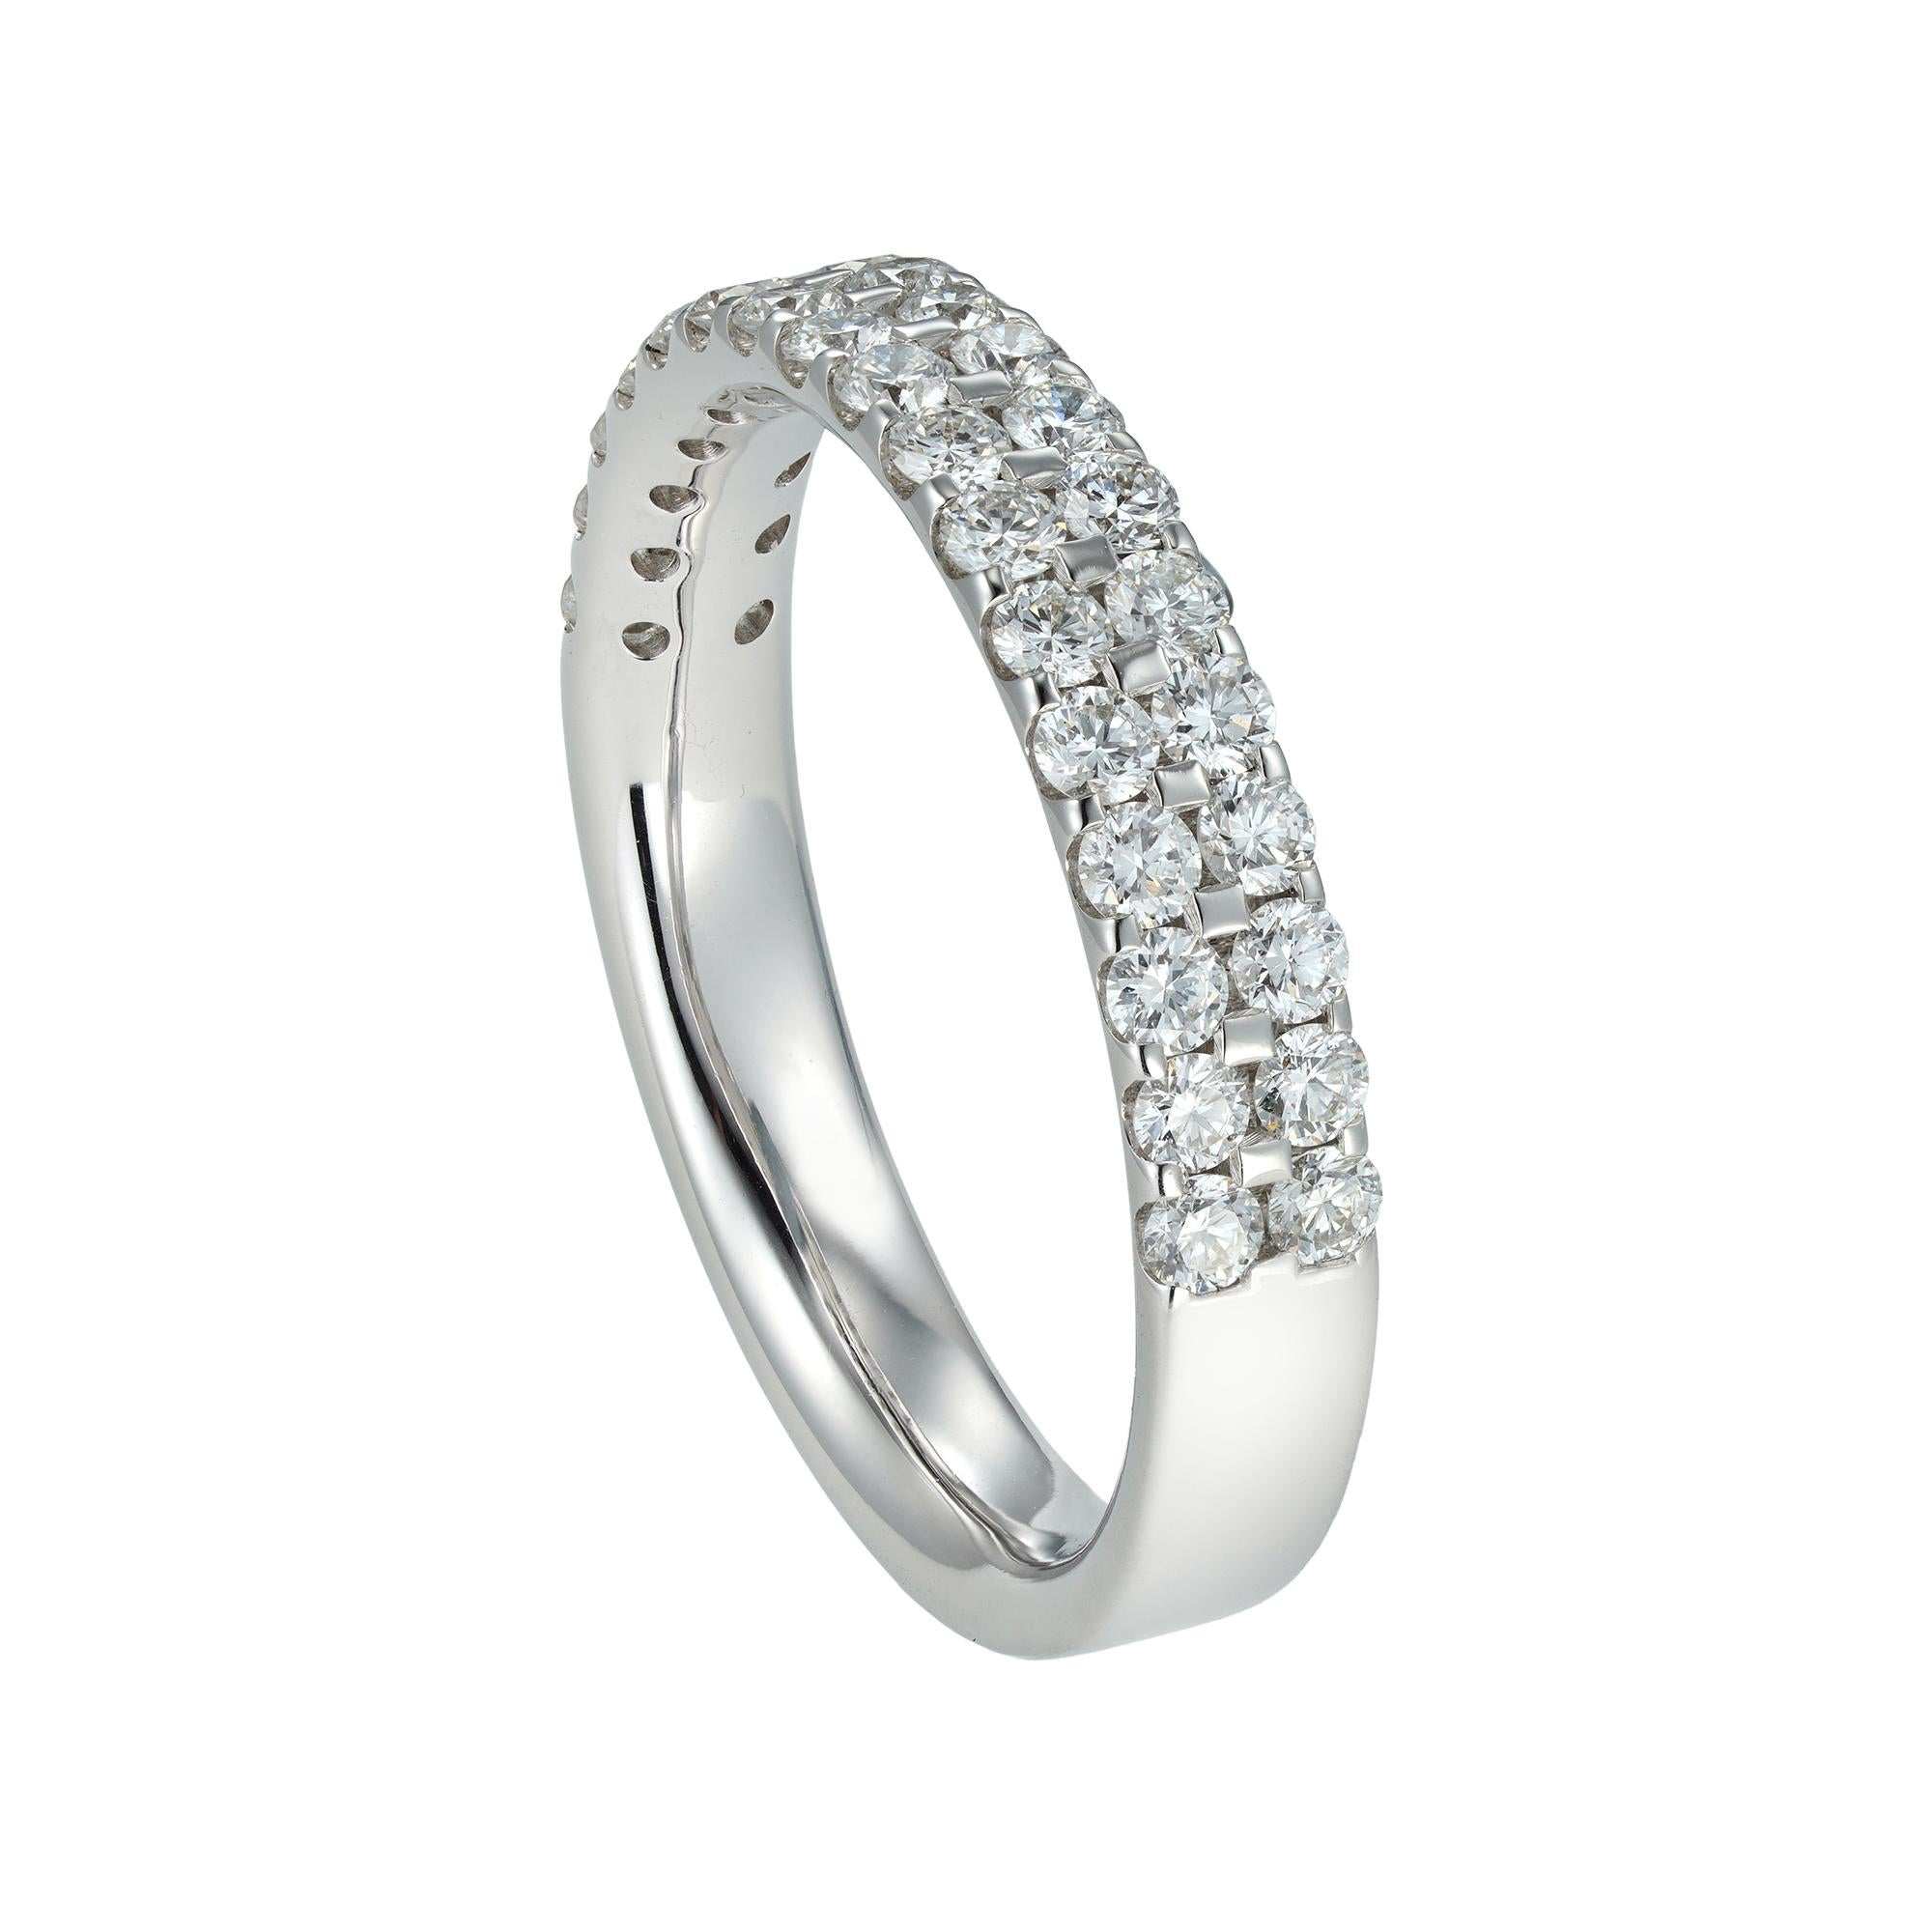 A double-row diamond half eternity ring, each row with seventeen round brilliant-cut diamonds, weighing 0.75 carats in total, claw-set in white gold mount, hallmarked 18ct gold, measuring 20 x 3.5mm, finger size M, gross weight 3.6 grams.

A bright